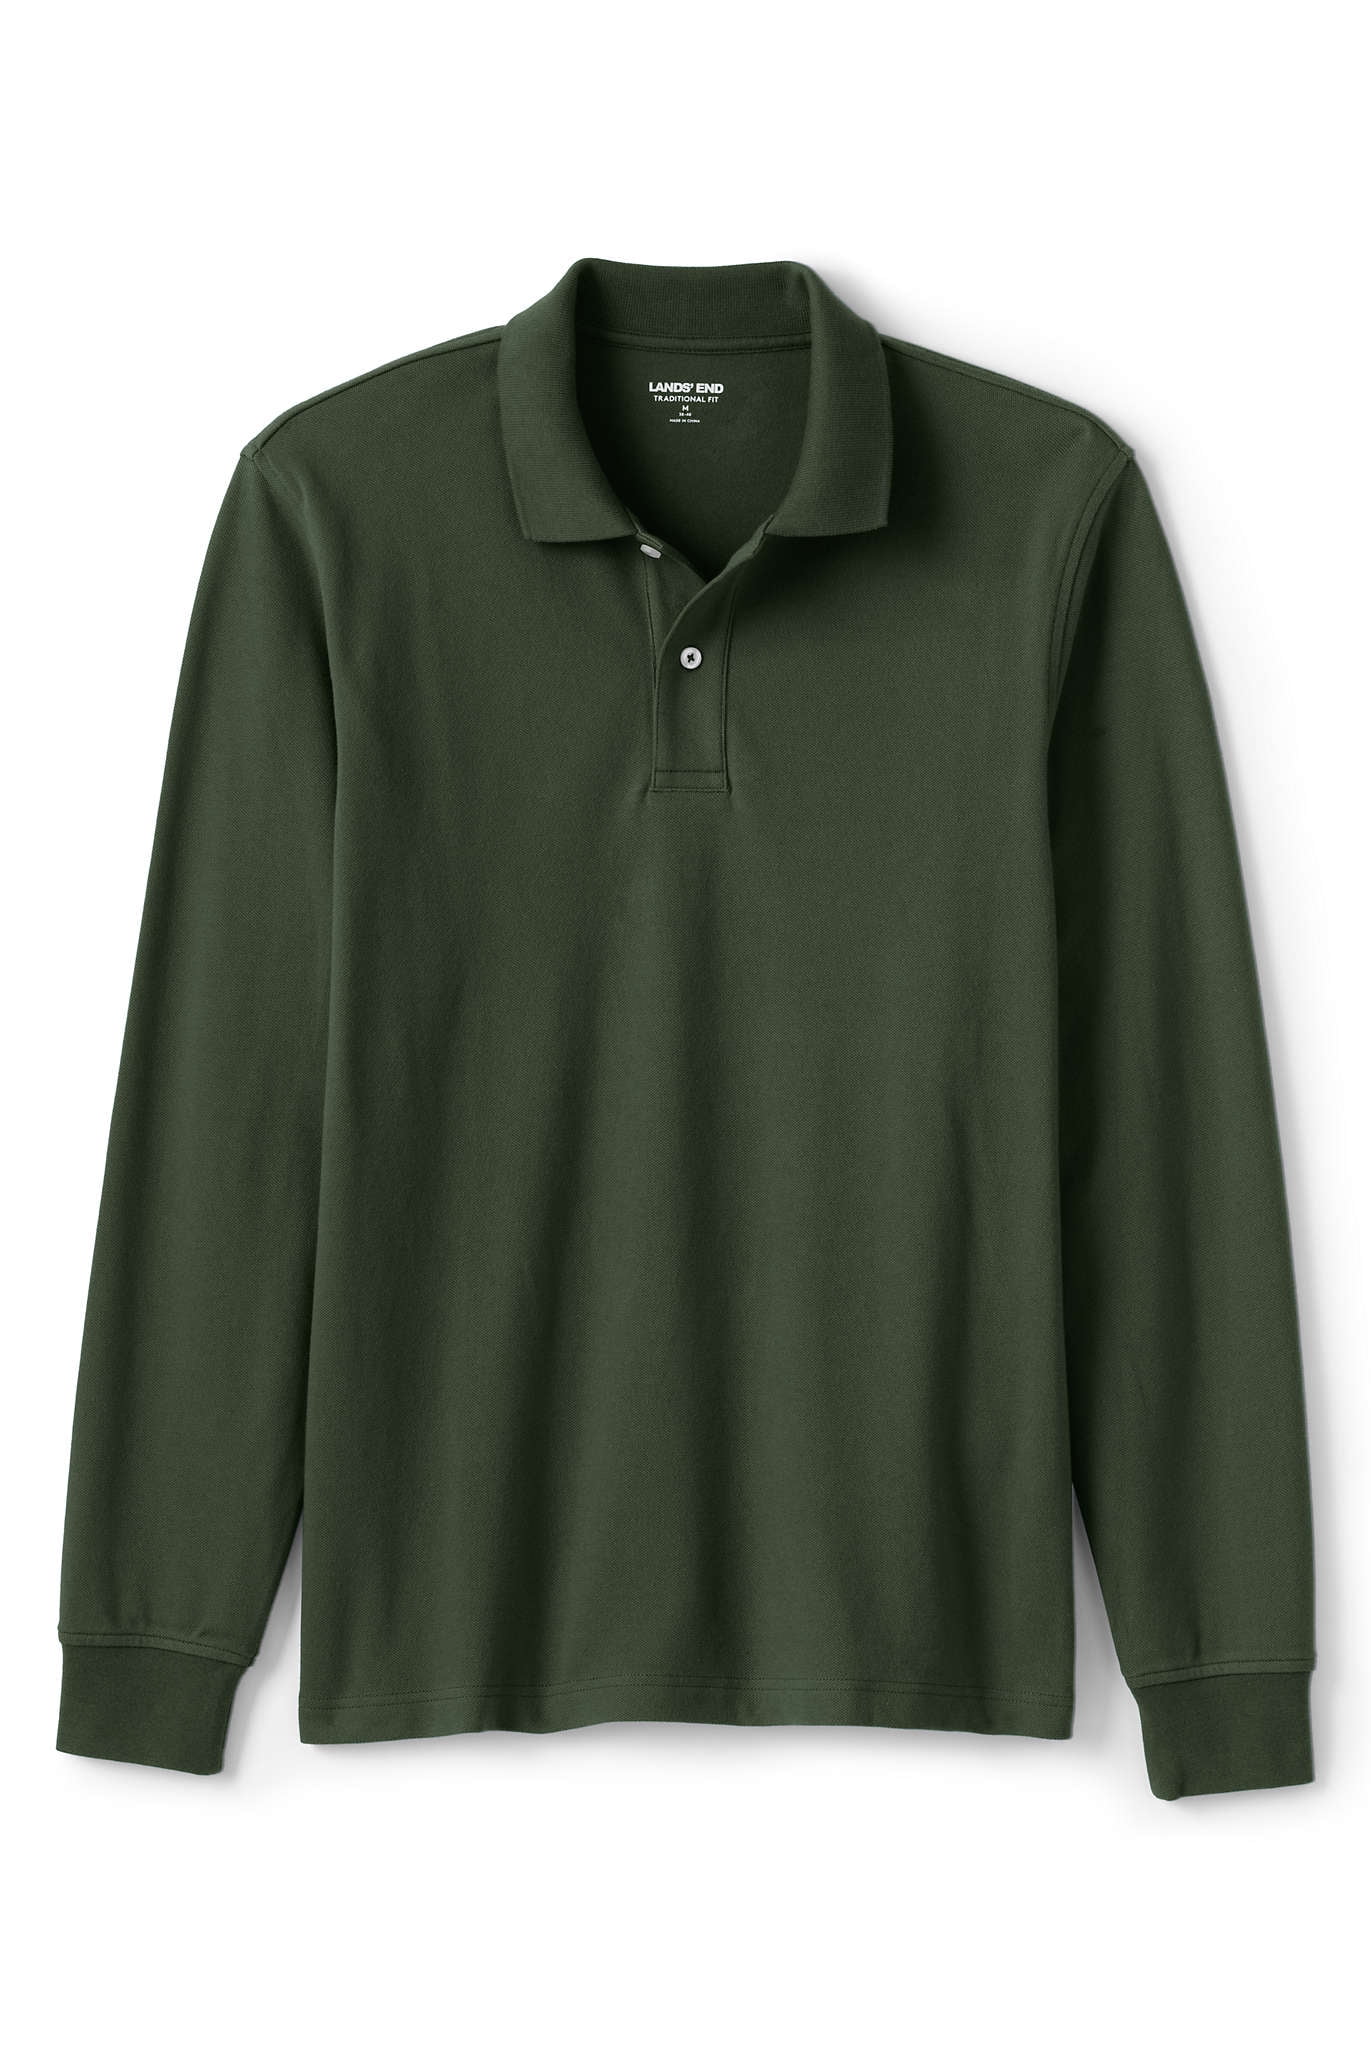 Lands' End Men's Big & Tall Comfort-First Long Sleeve Solid Mesh Polo ...